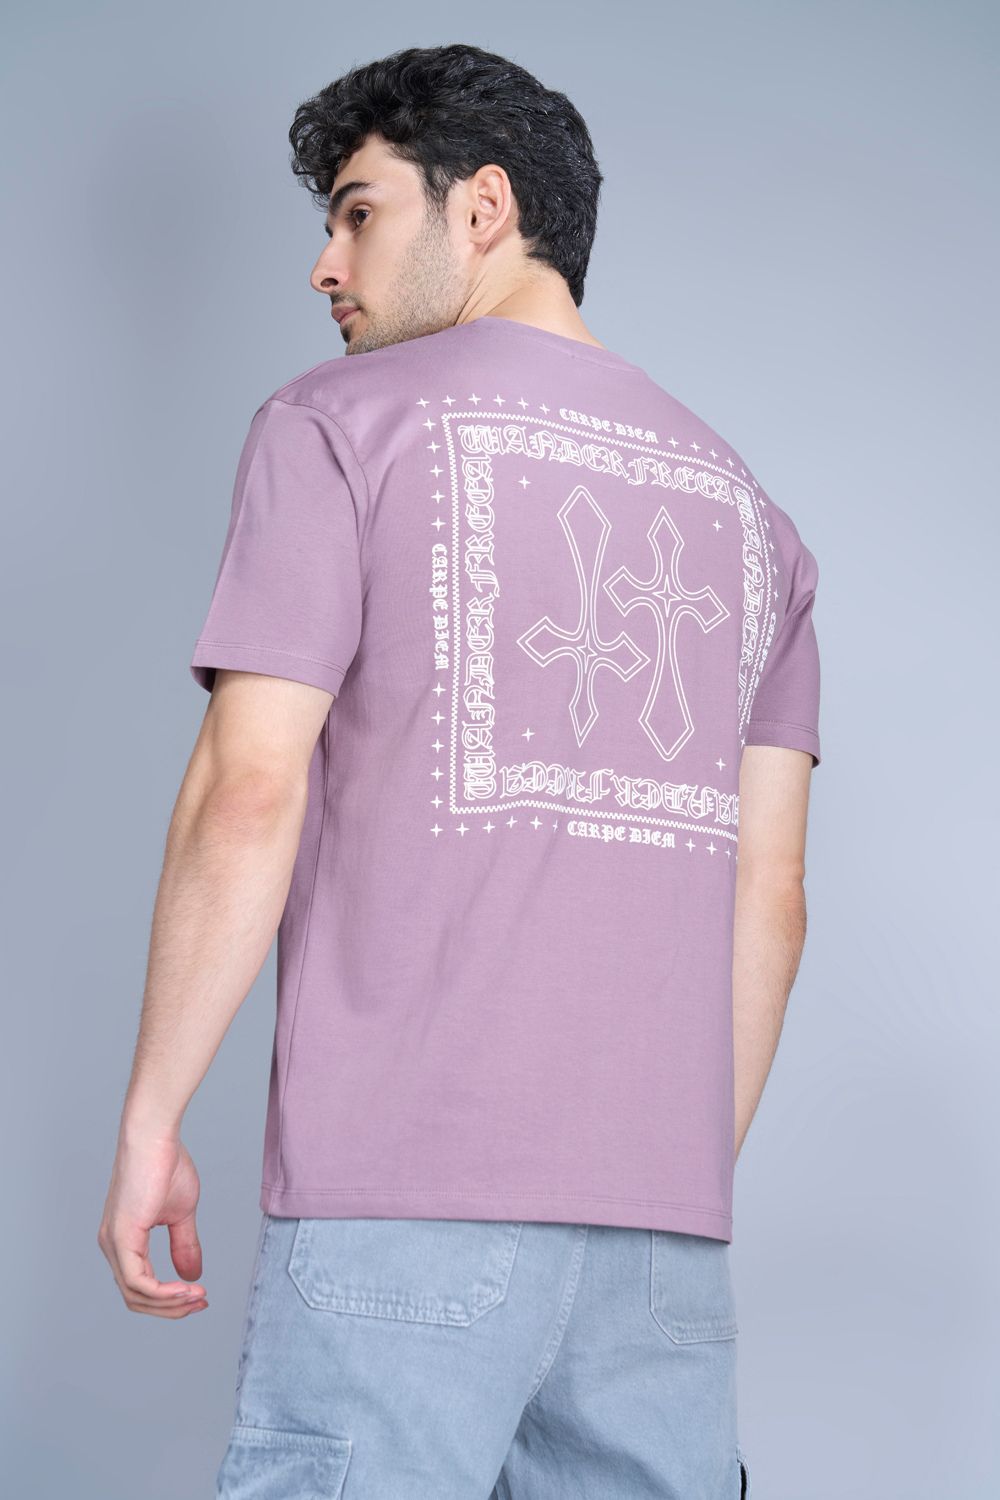 Cotton oversized T shirt for men in the solid color Opera Mauve with half sleeves and crew neck, back view.